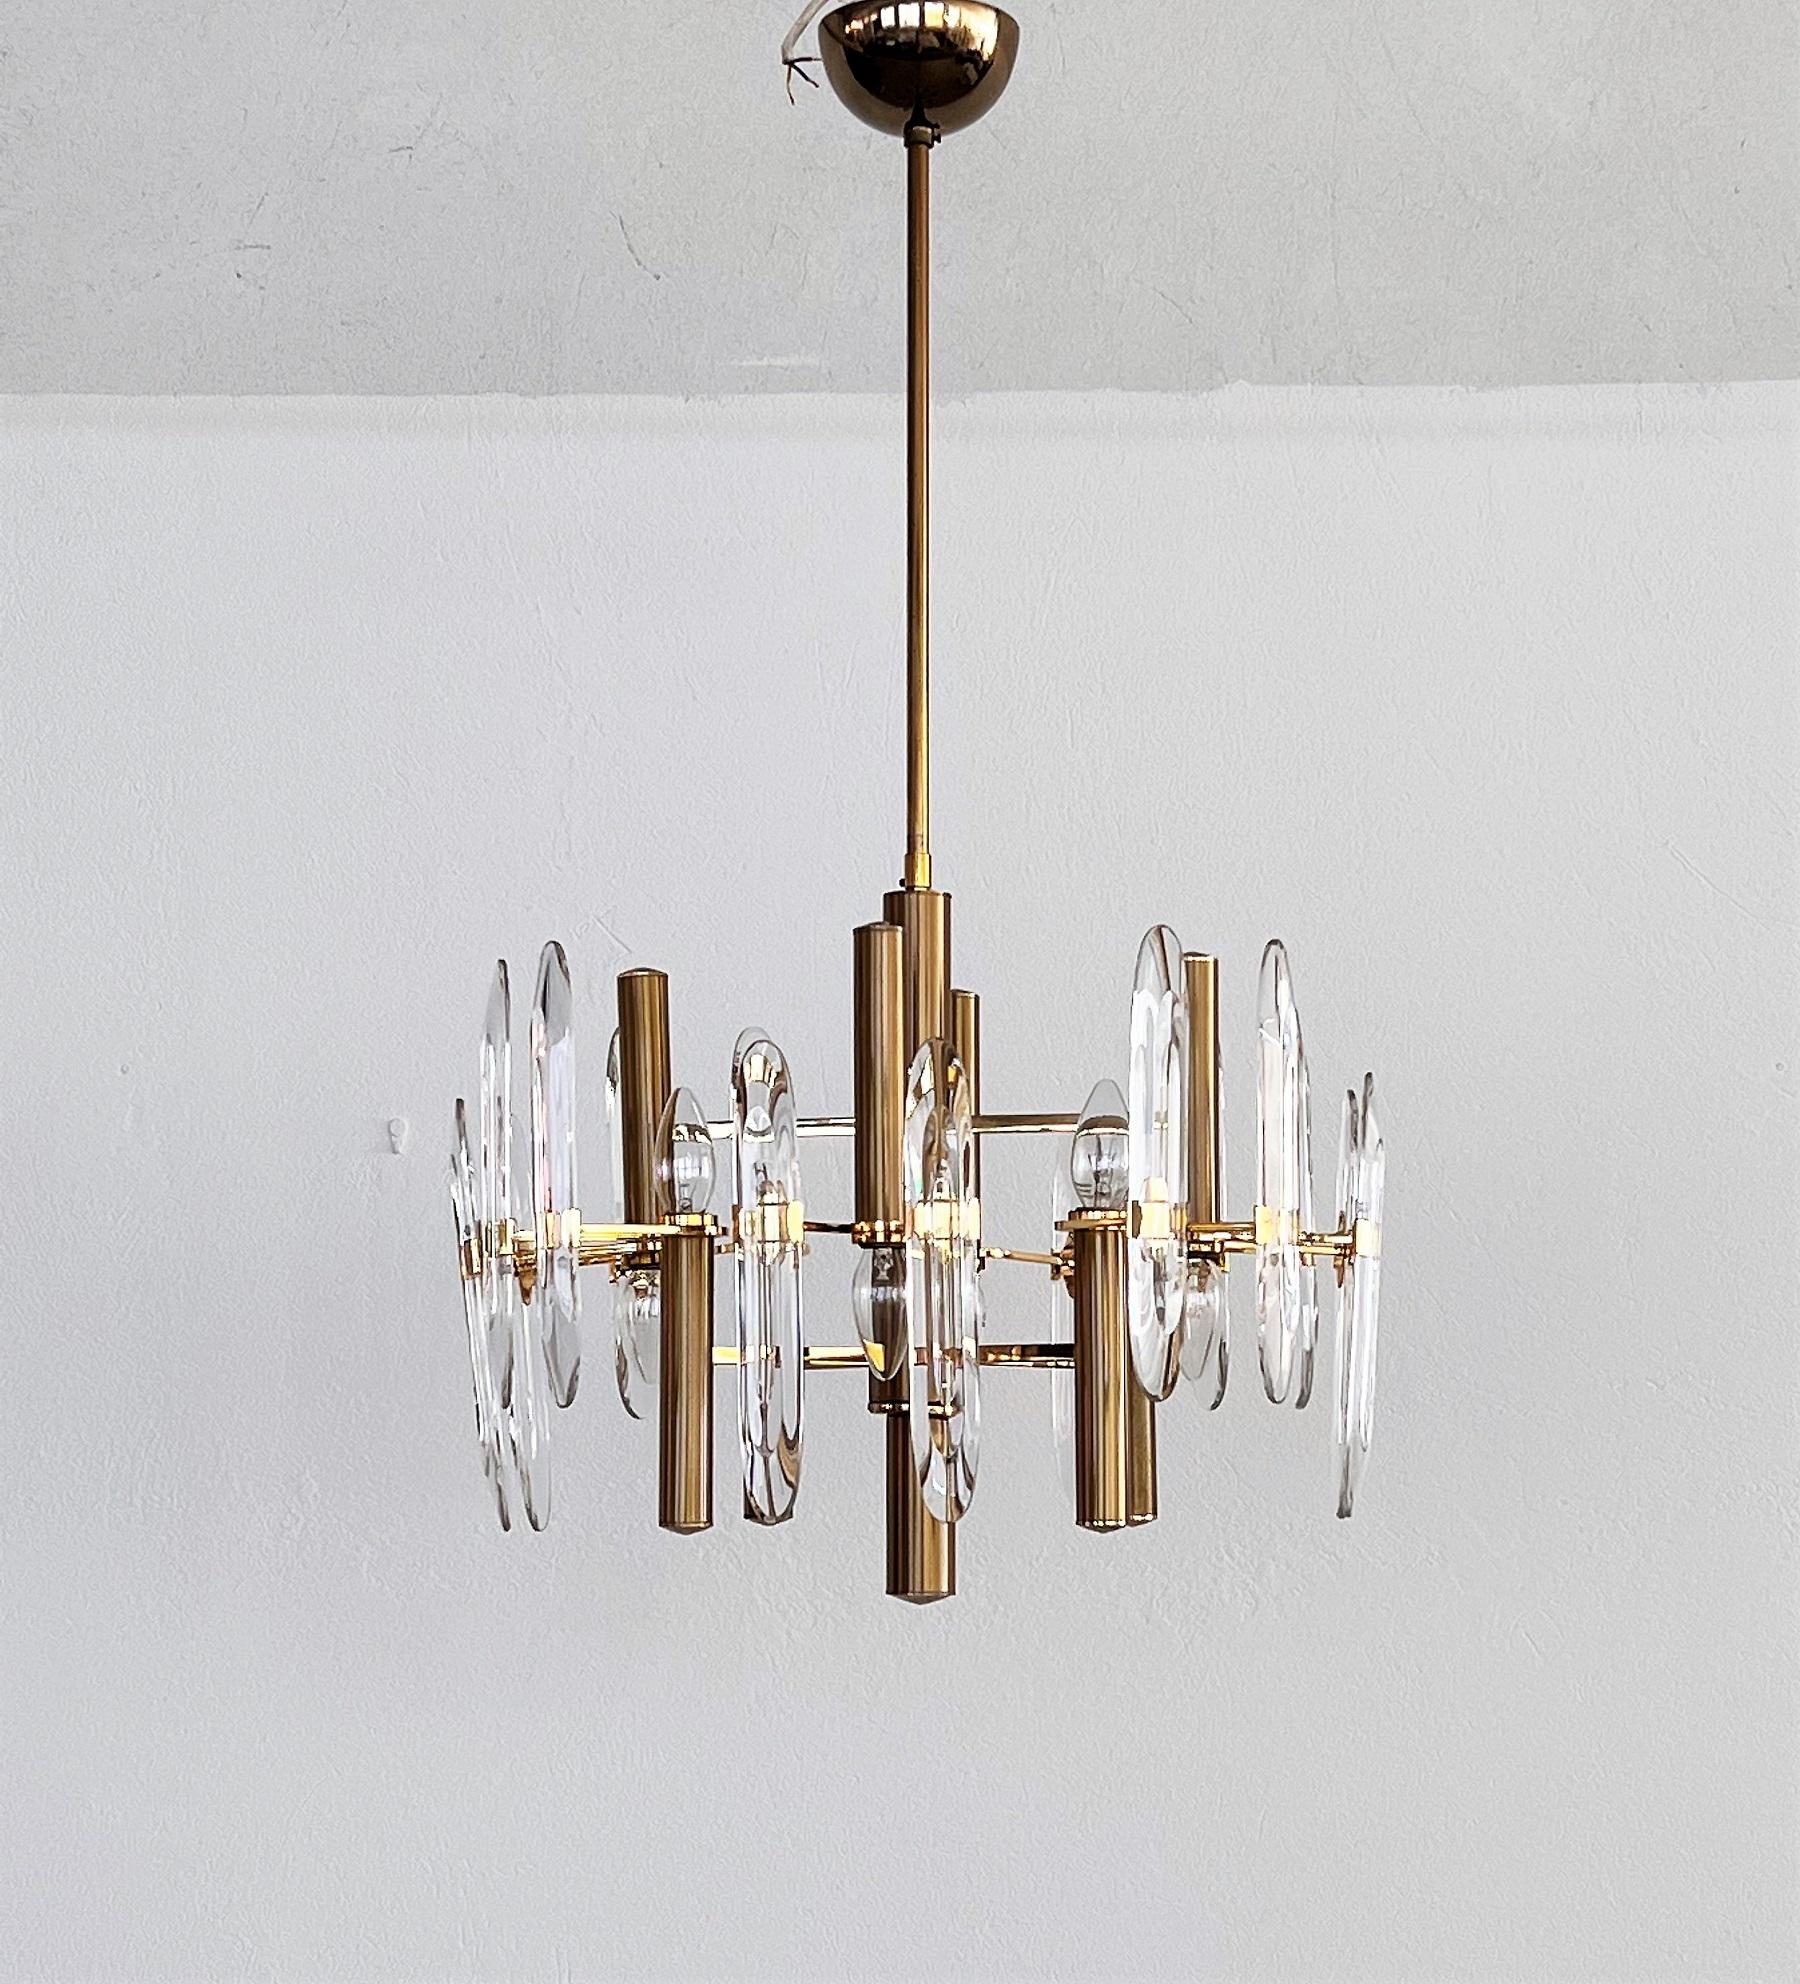 Eight light chandelier from Gaetano Sciolari production made for Stilkronen, Italy, 1970s.
Four lights downward and four lights upwards. Brass is partly gold-plated. Transparent glass elements in Lead Crystal.
Classic version of the Sciolari's